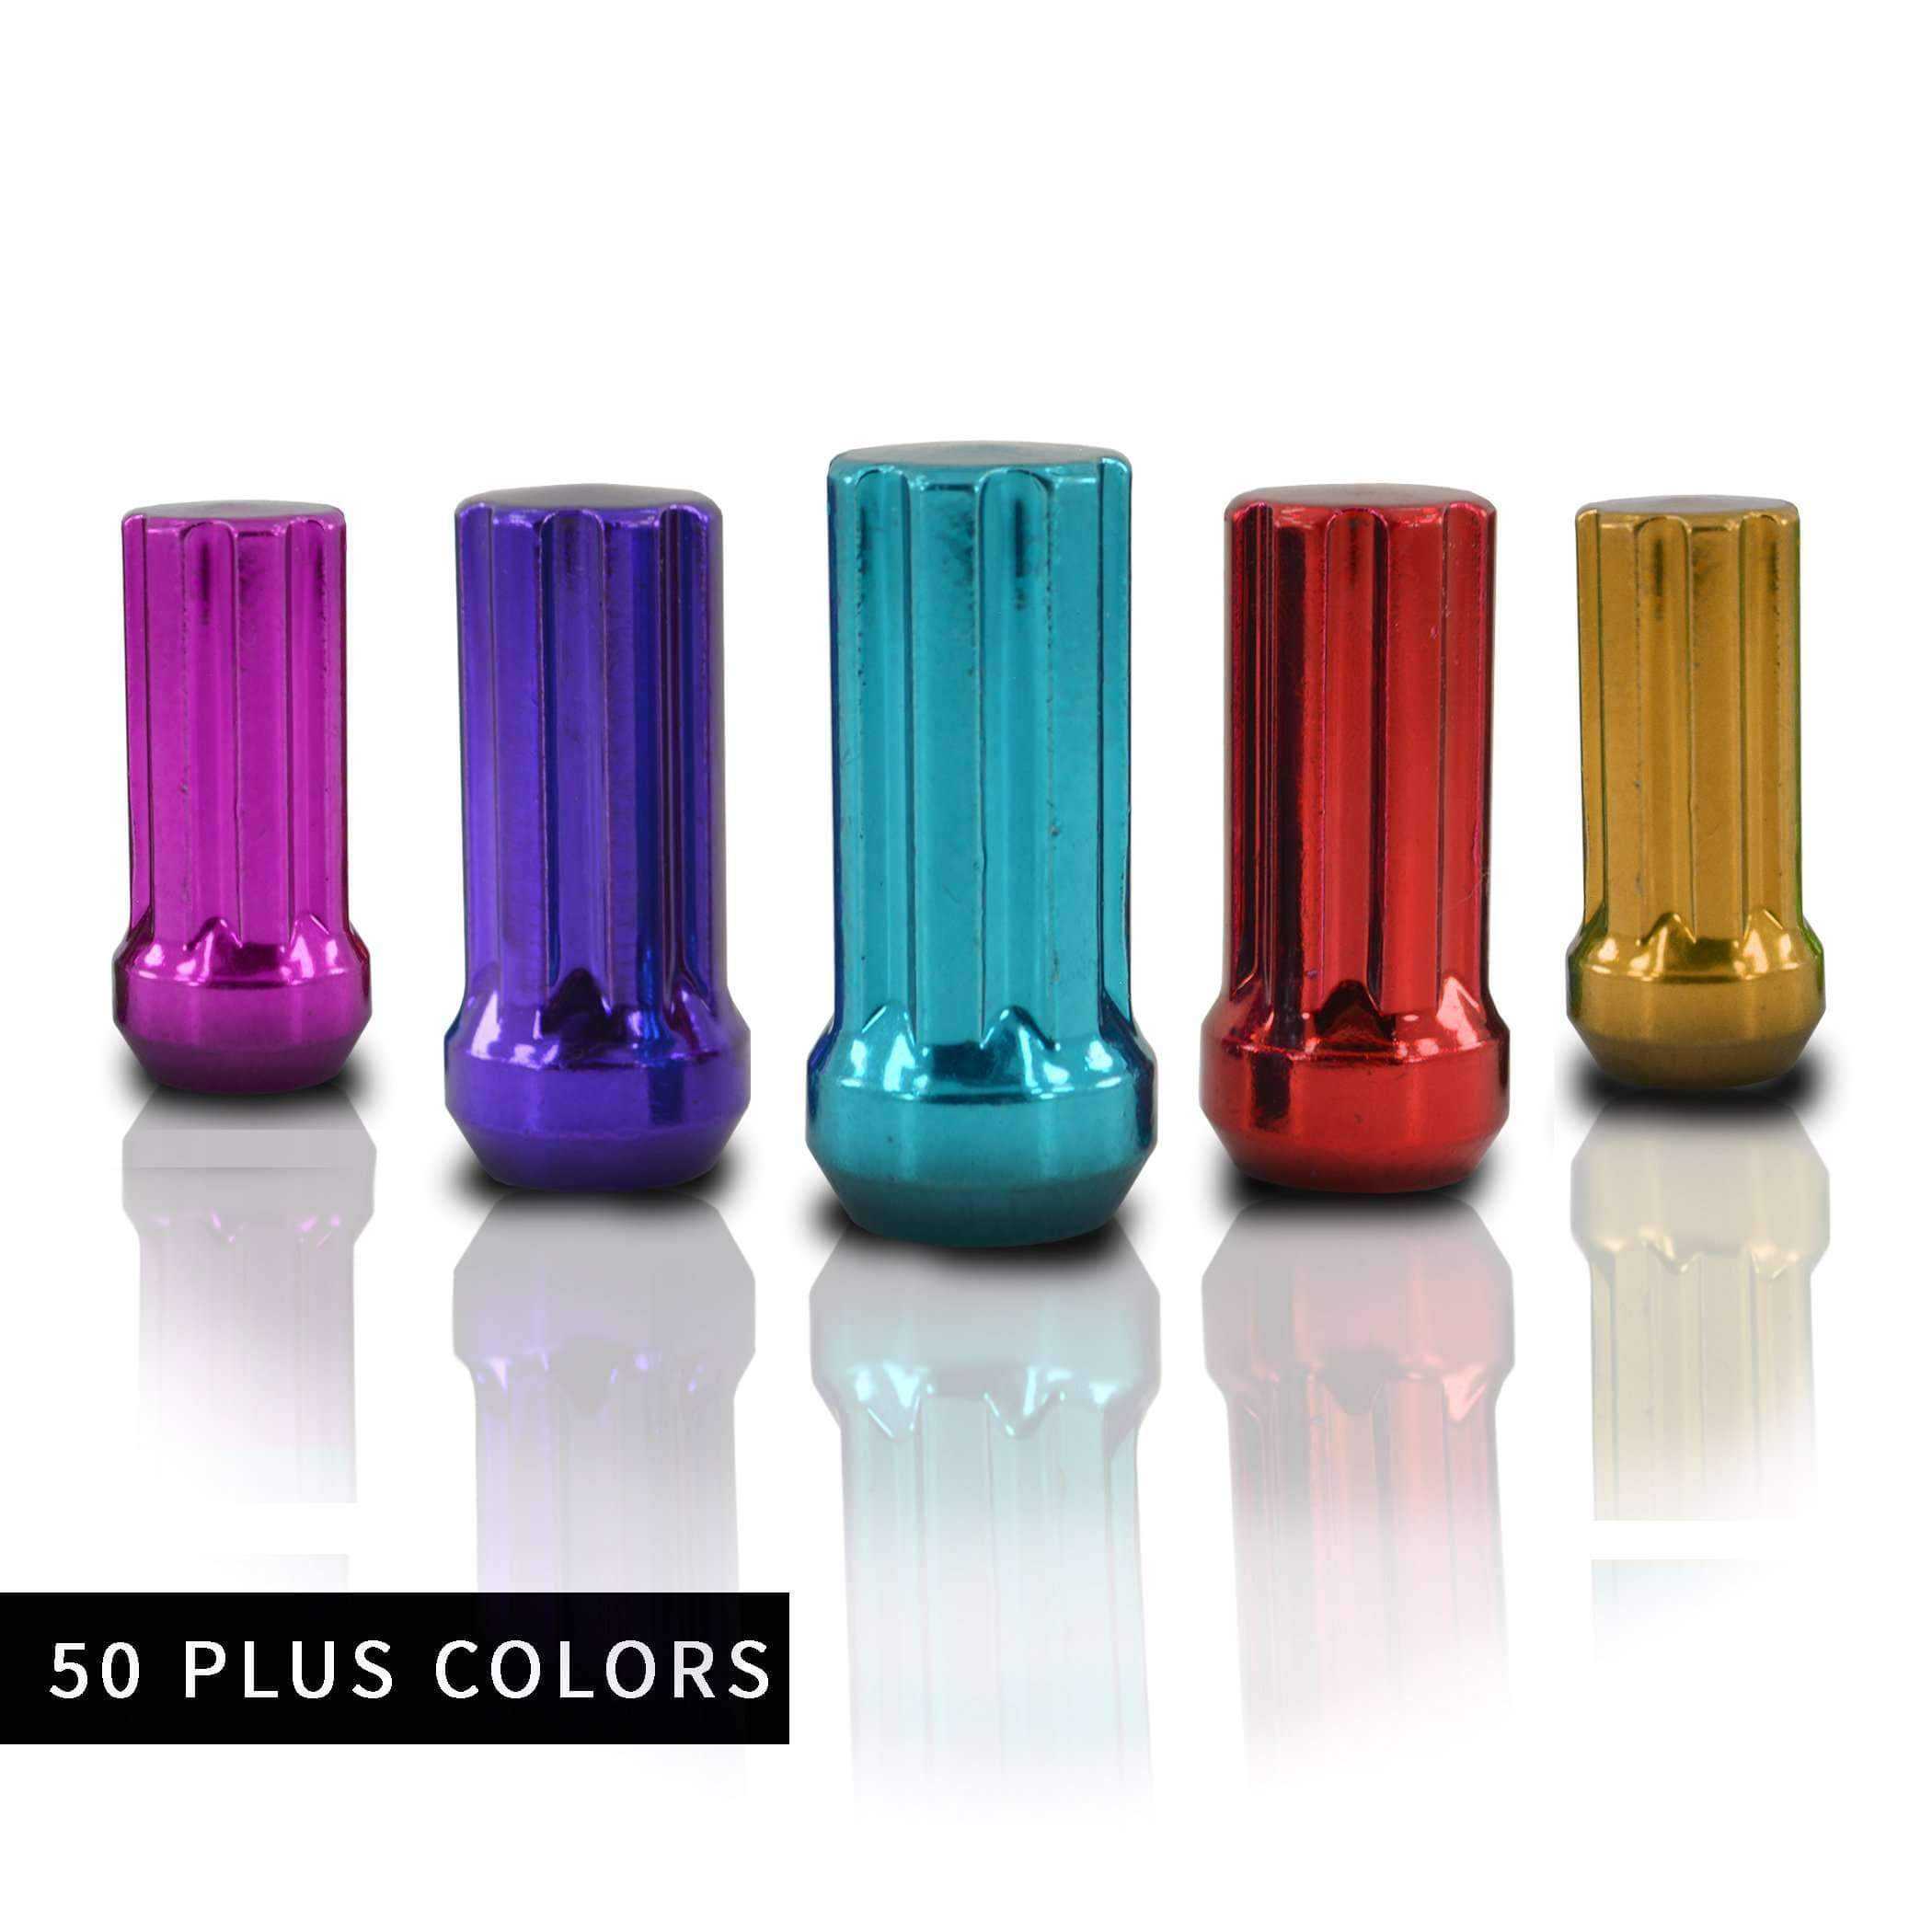 20 pc 14x1.5 main picture 7 Spline Duplex security lug nuts 2" Tall For Aftermarket Wheels powder coated durable coating